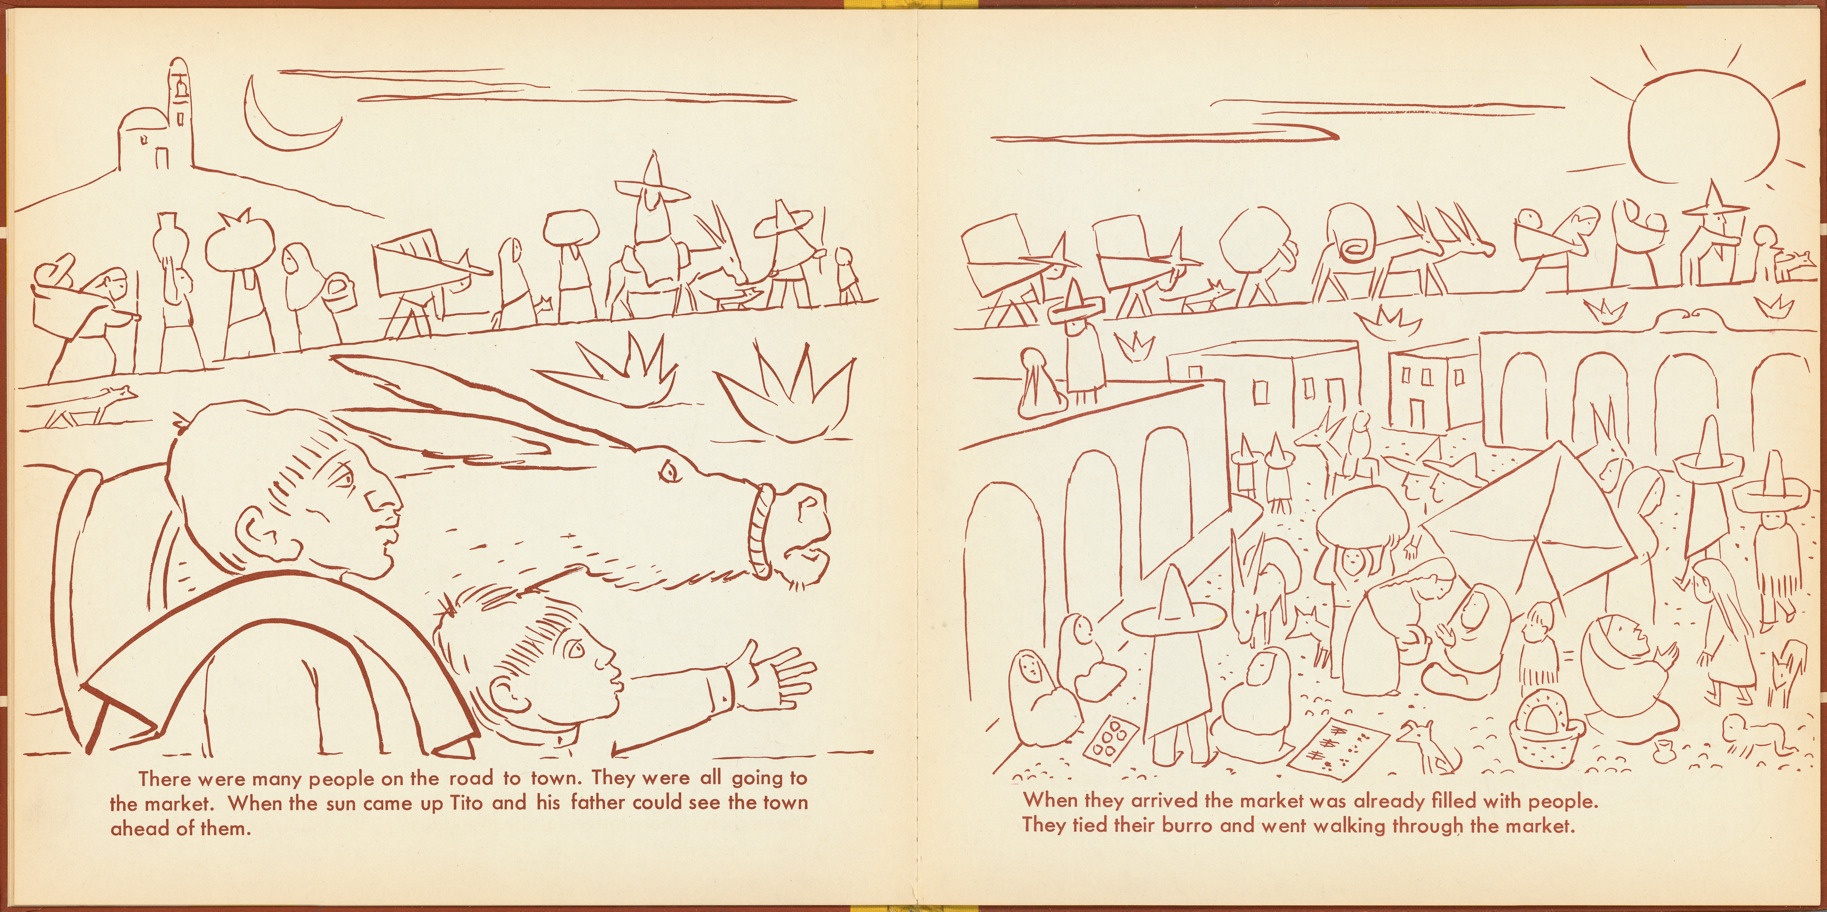 Pages 10–11 of 'Tito's Hats' written by Melchor G. Ferrer.  Illustrations by Jean Charlot.